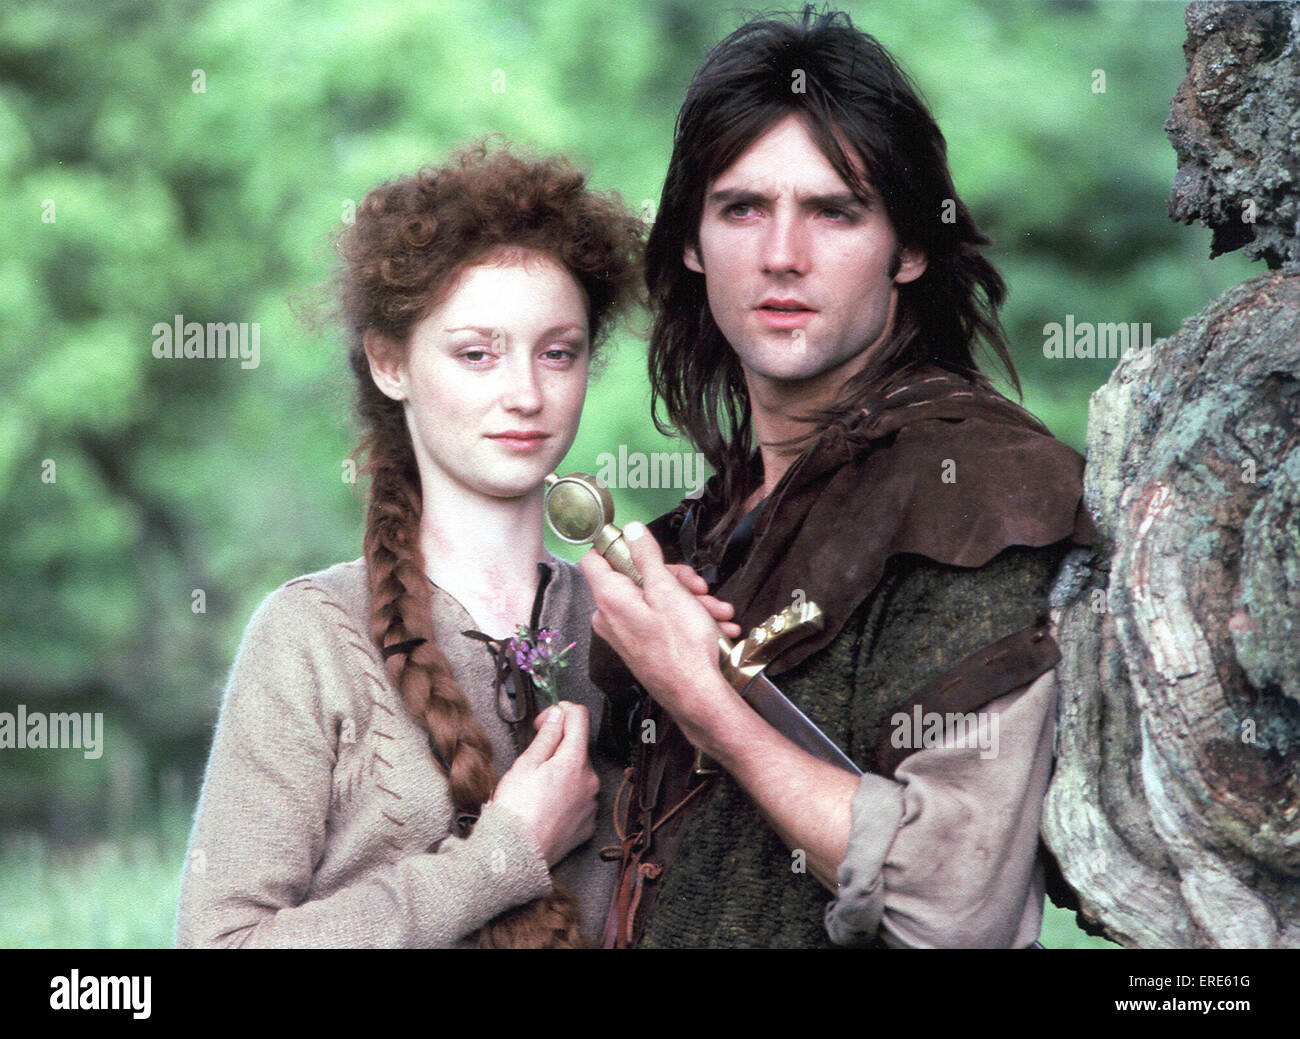 Actor Michael Praed as Robin Hood and ballerina Judi Trott as Maid Marion filming Robin of Sherwood in the Forest of Dean in Stock Photo